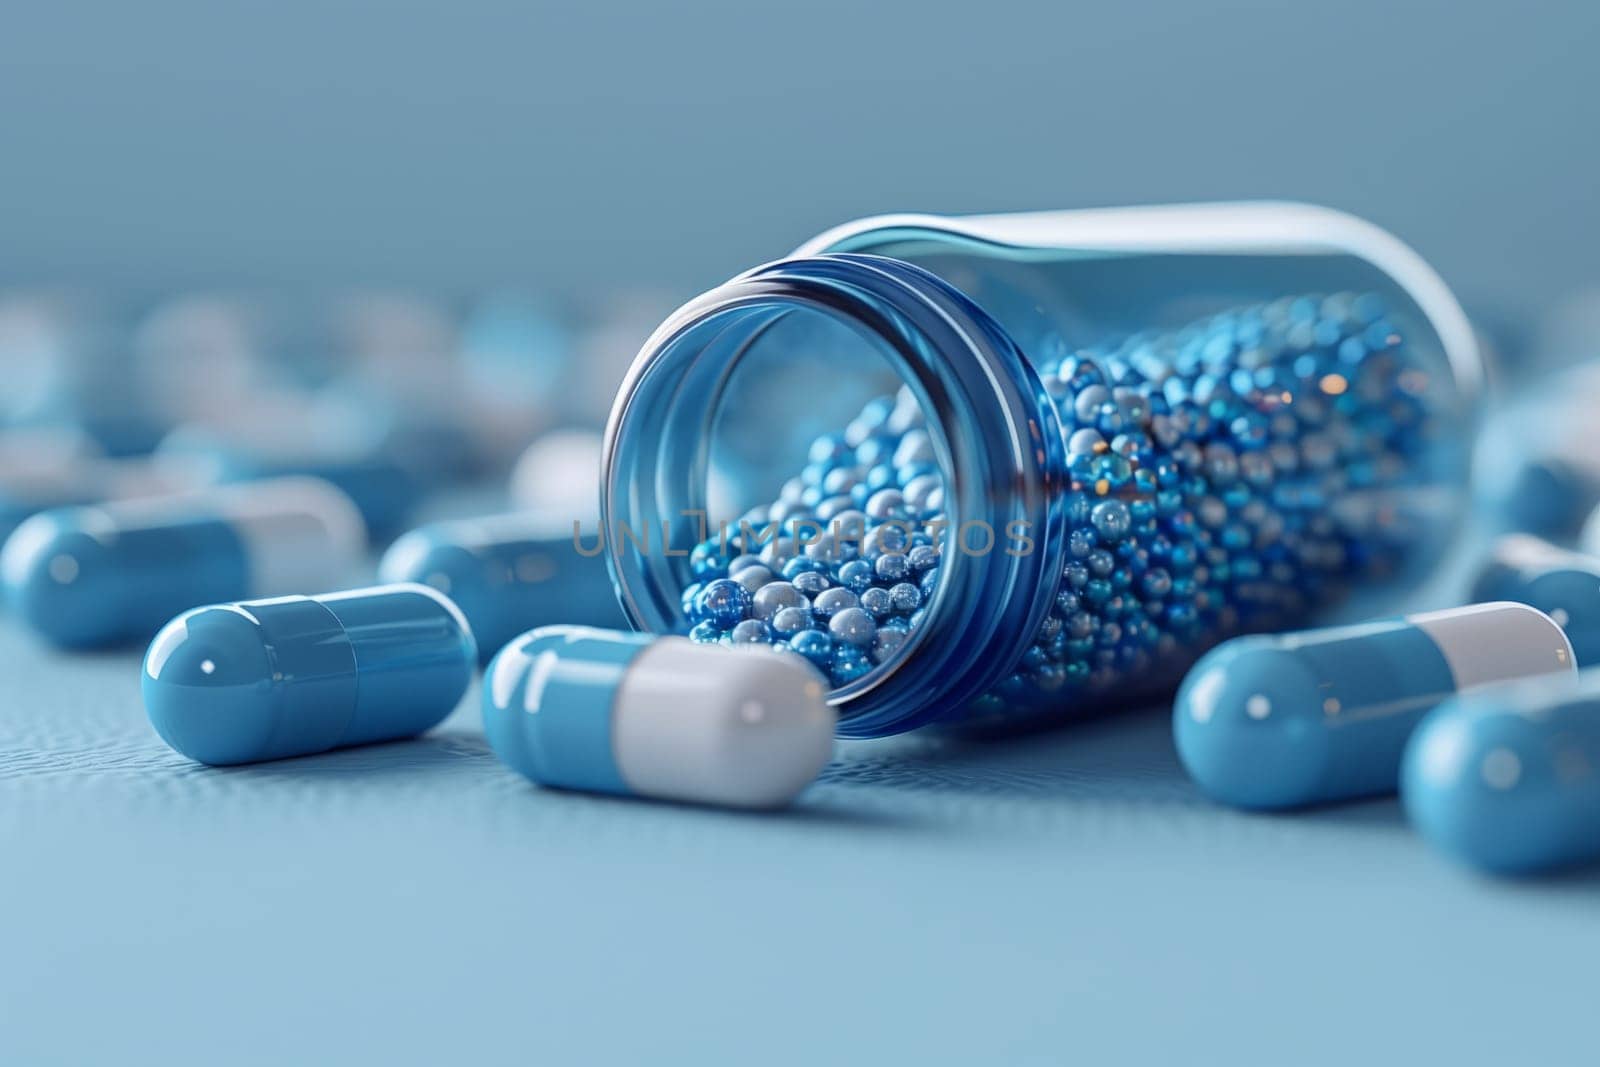 A jar of azure and white liquid capsules spills onto a table, resembling vibrant body jewelry. The aqua hues inspire creative arts and unique jewelry designs